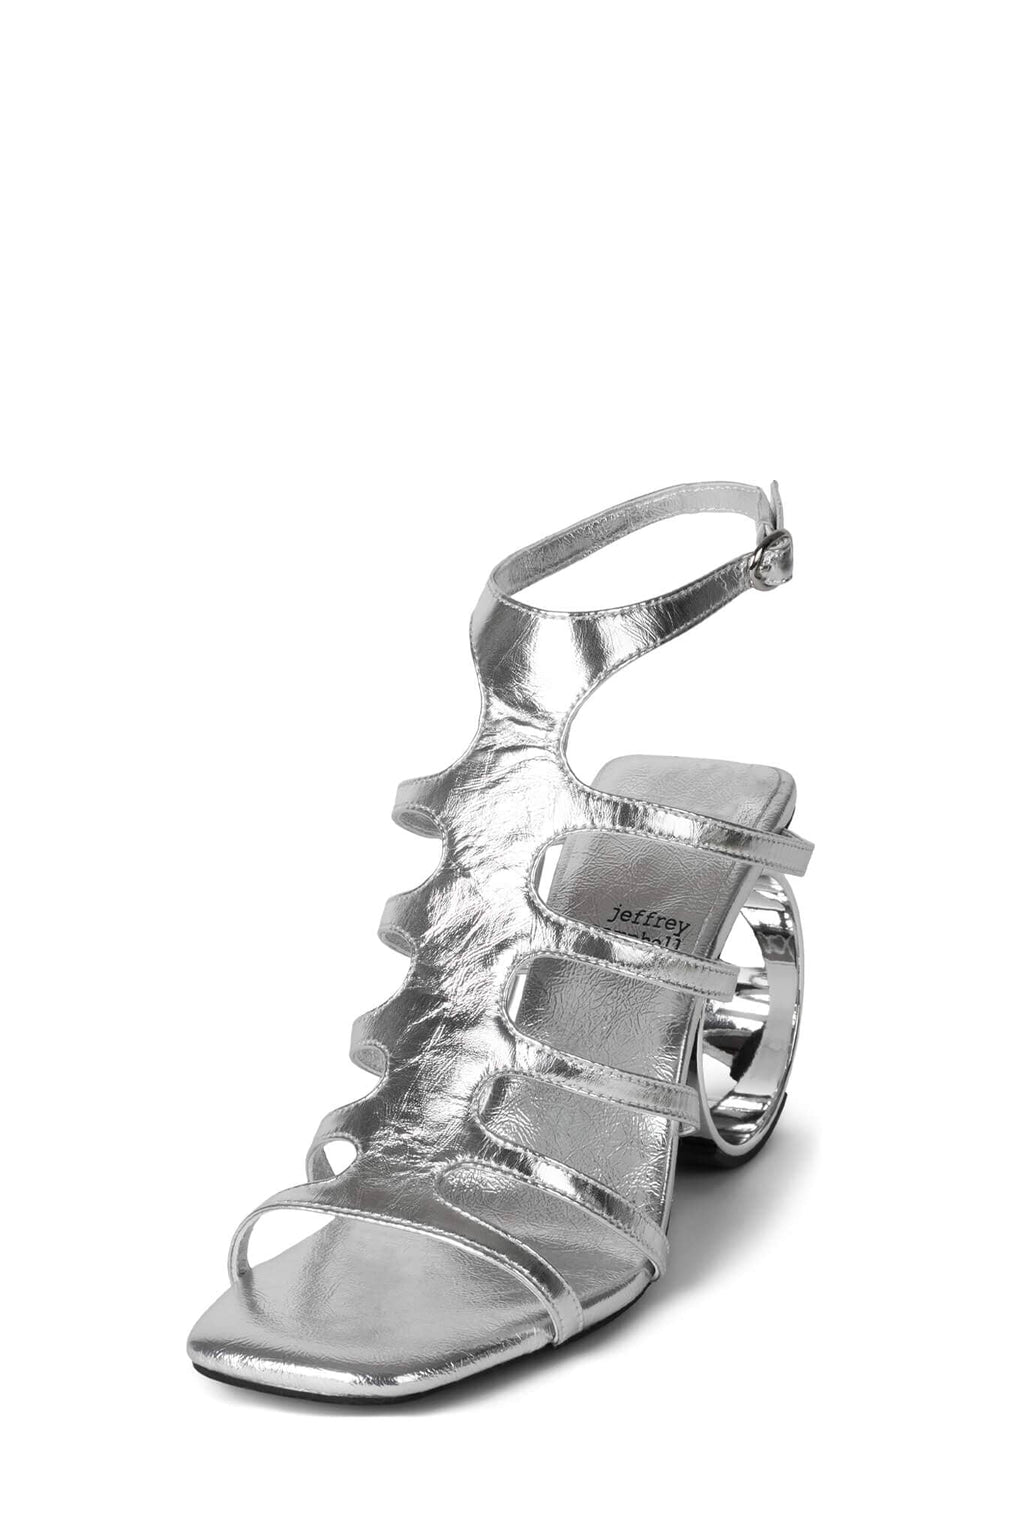 Back-in-Stock – Jeffrey Campbell